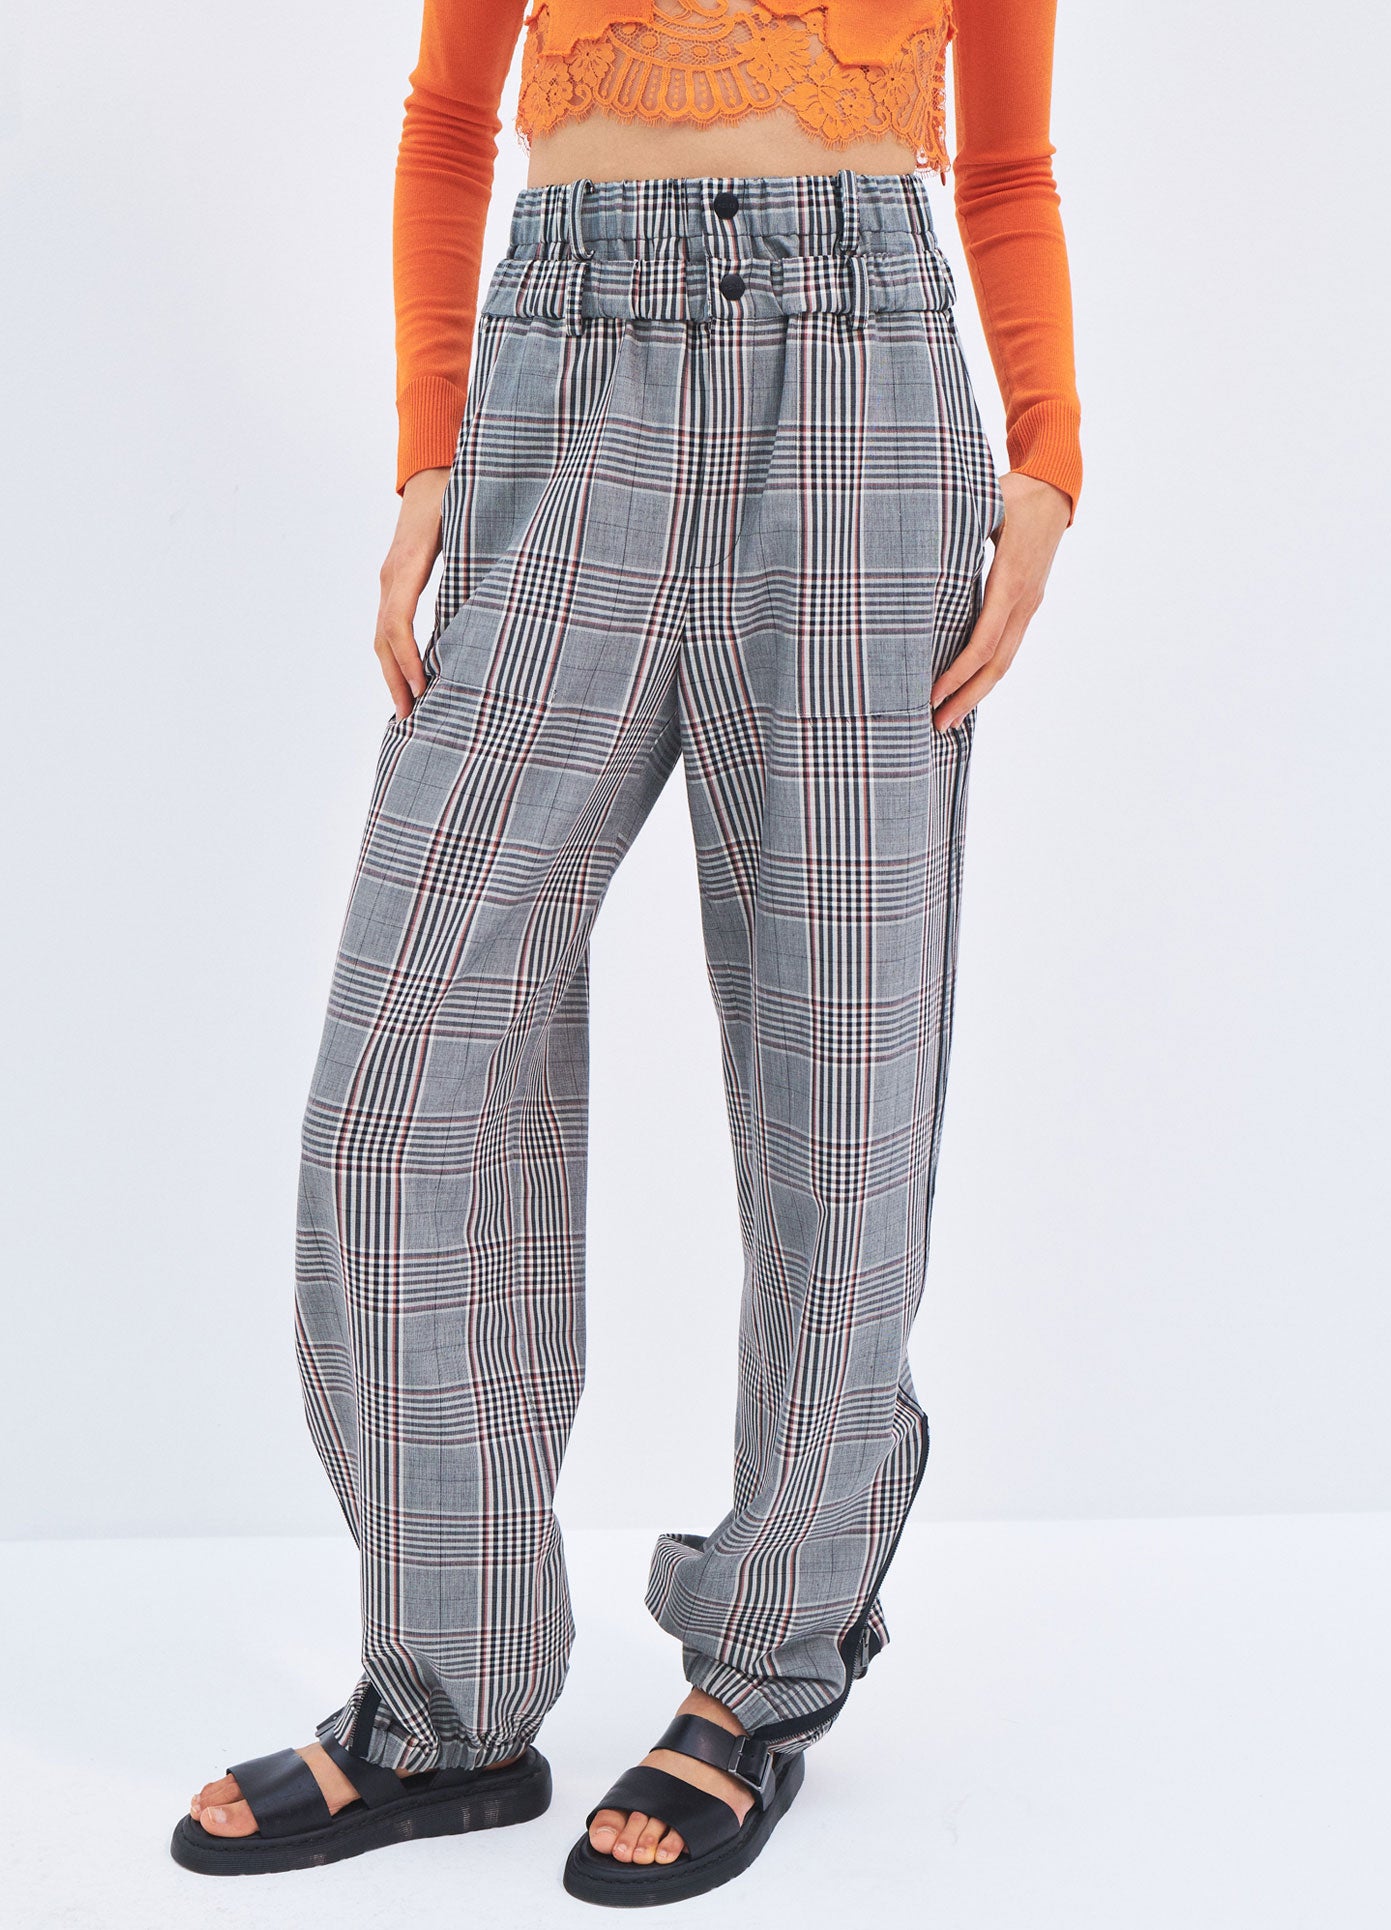 MONSE Spring 2024 Plaid Double Waistband Zipper DTL Pant in Black Multi on model front detail view